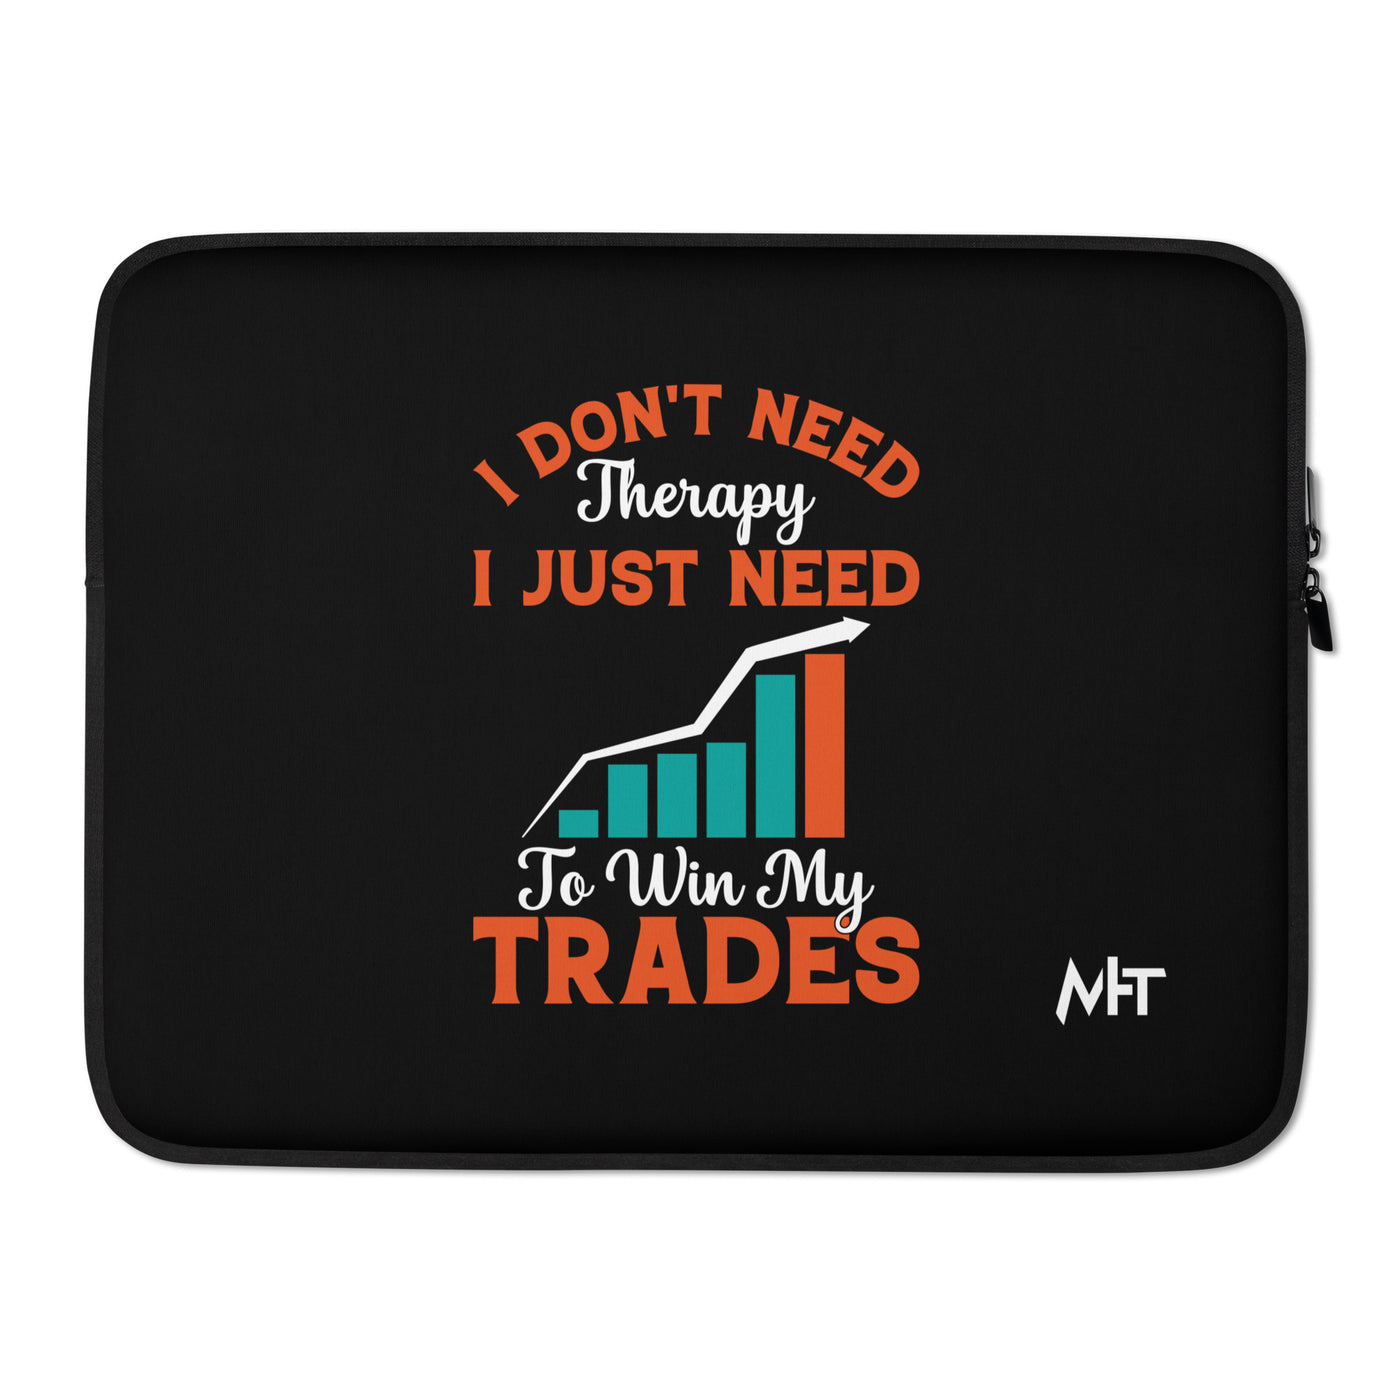 I don't Need therapy, I just Need to Win my Trades - Laptop Sleeve